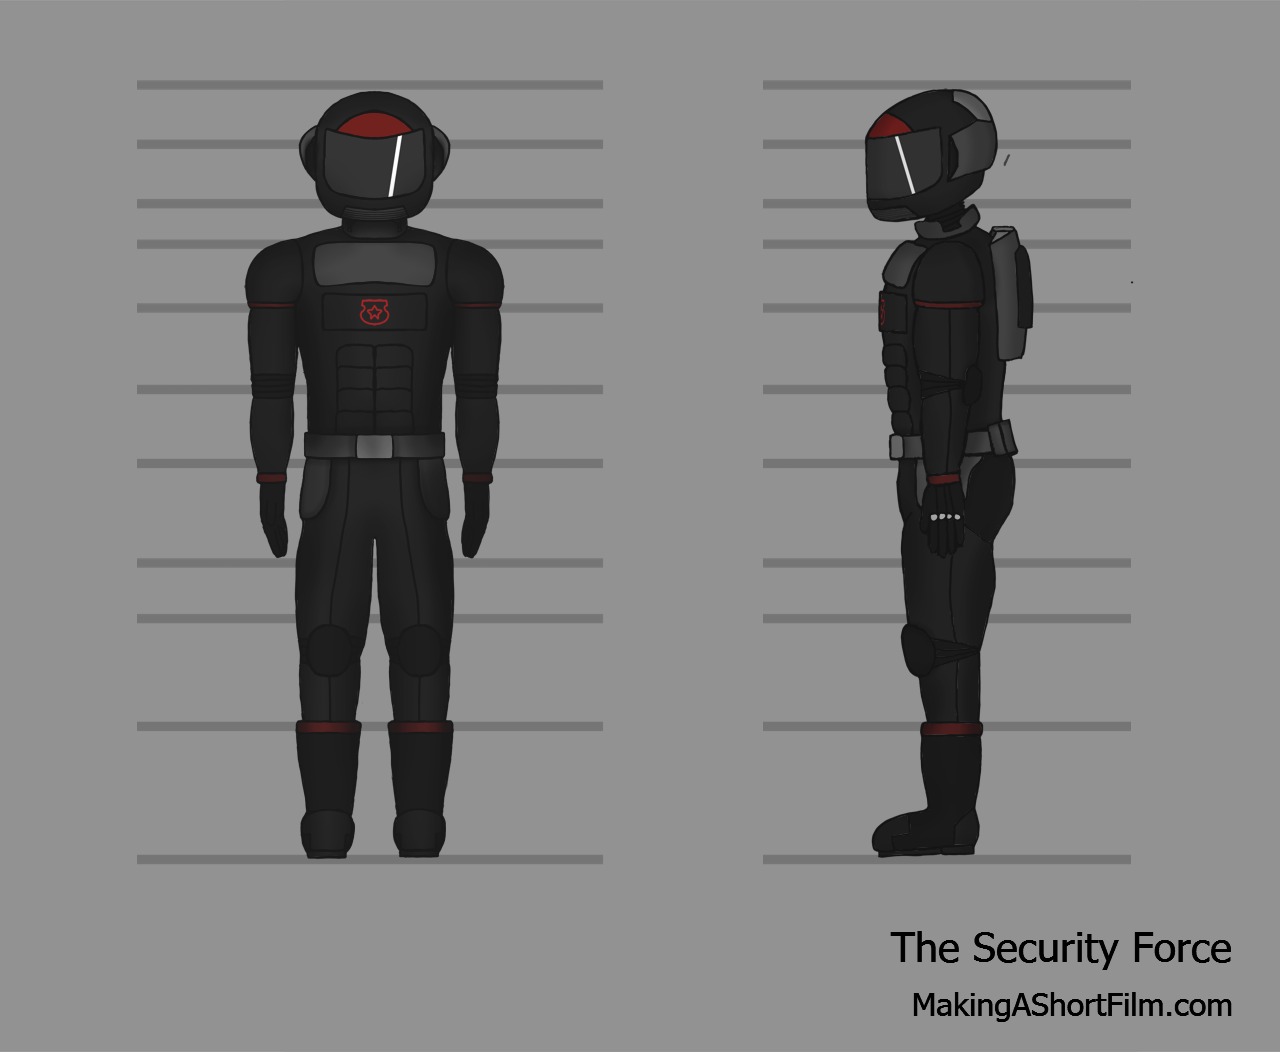 The completed Security Force concept art